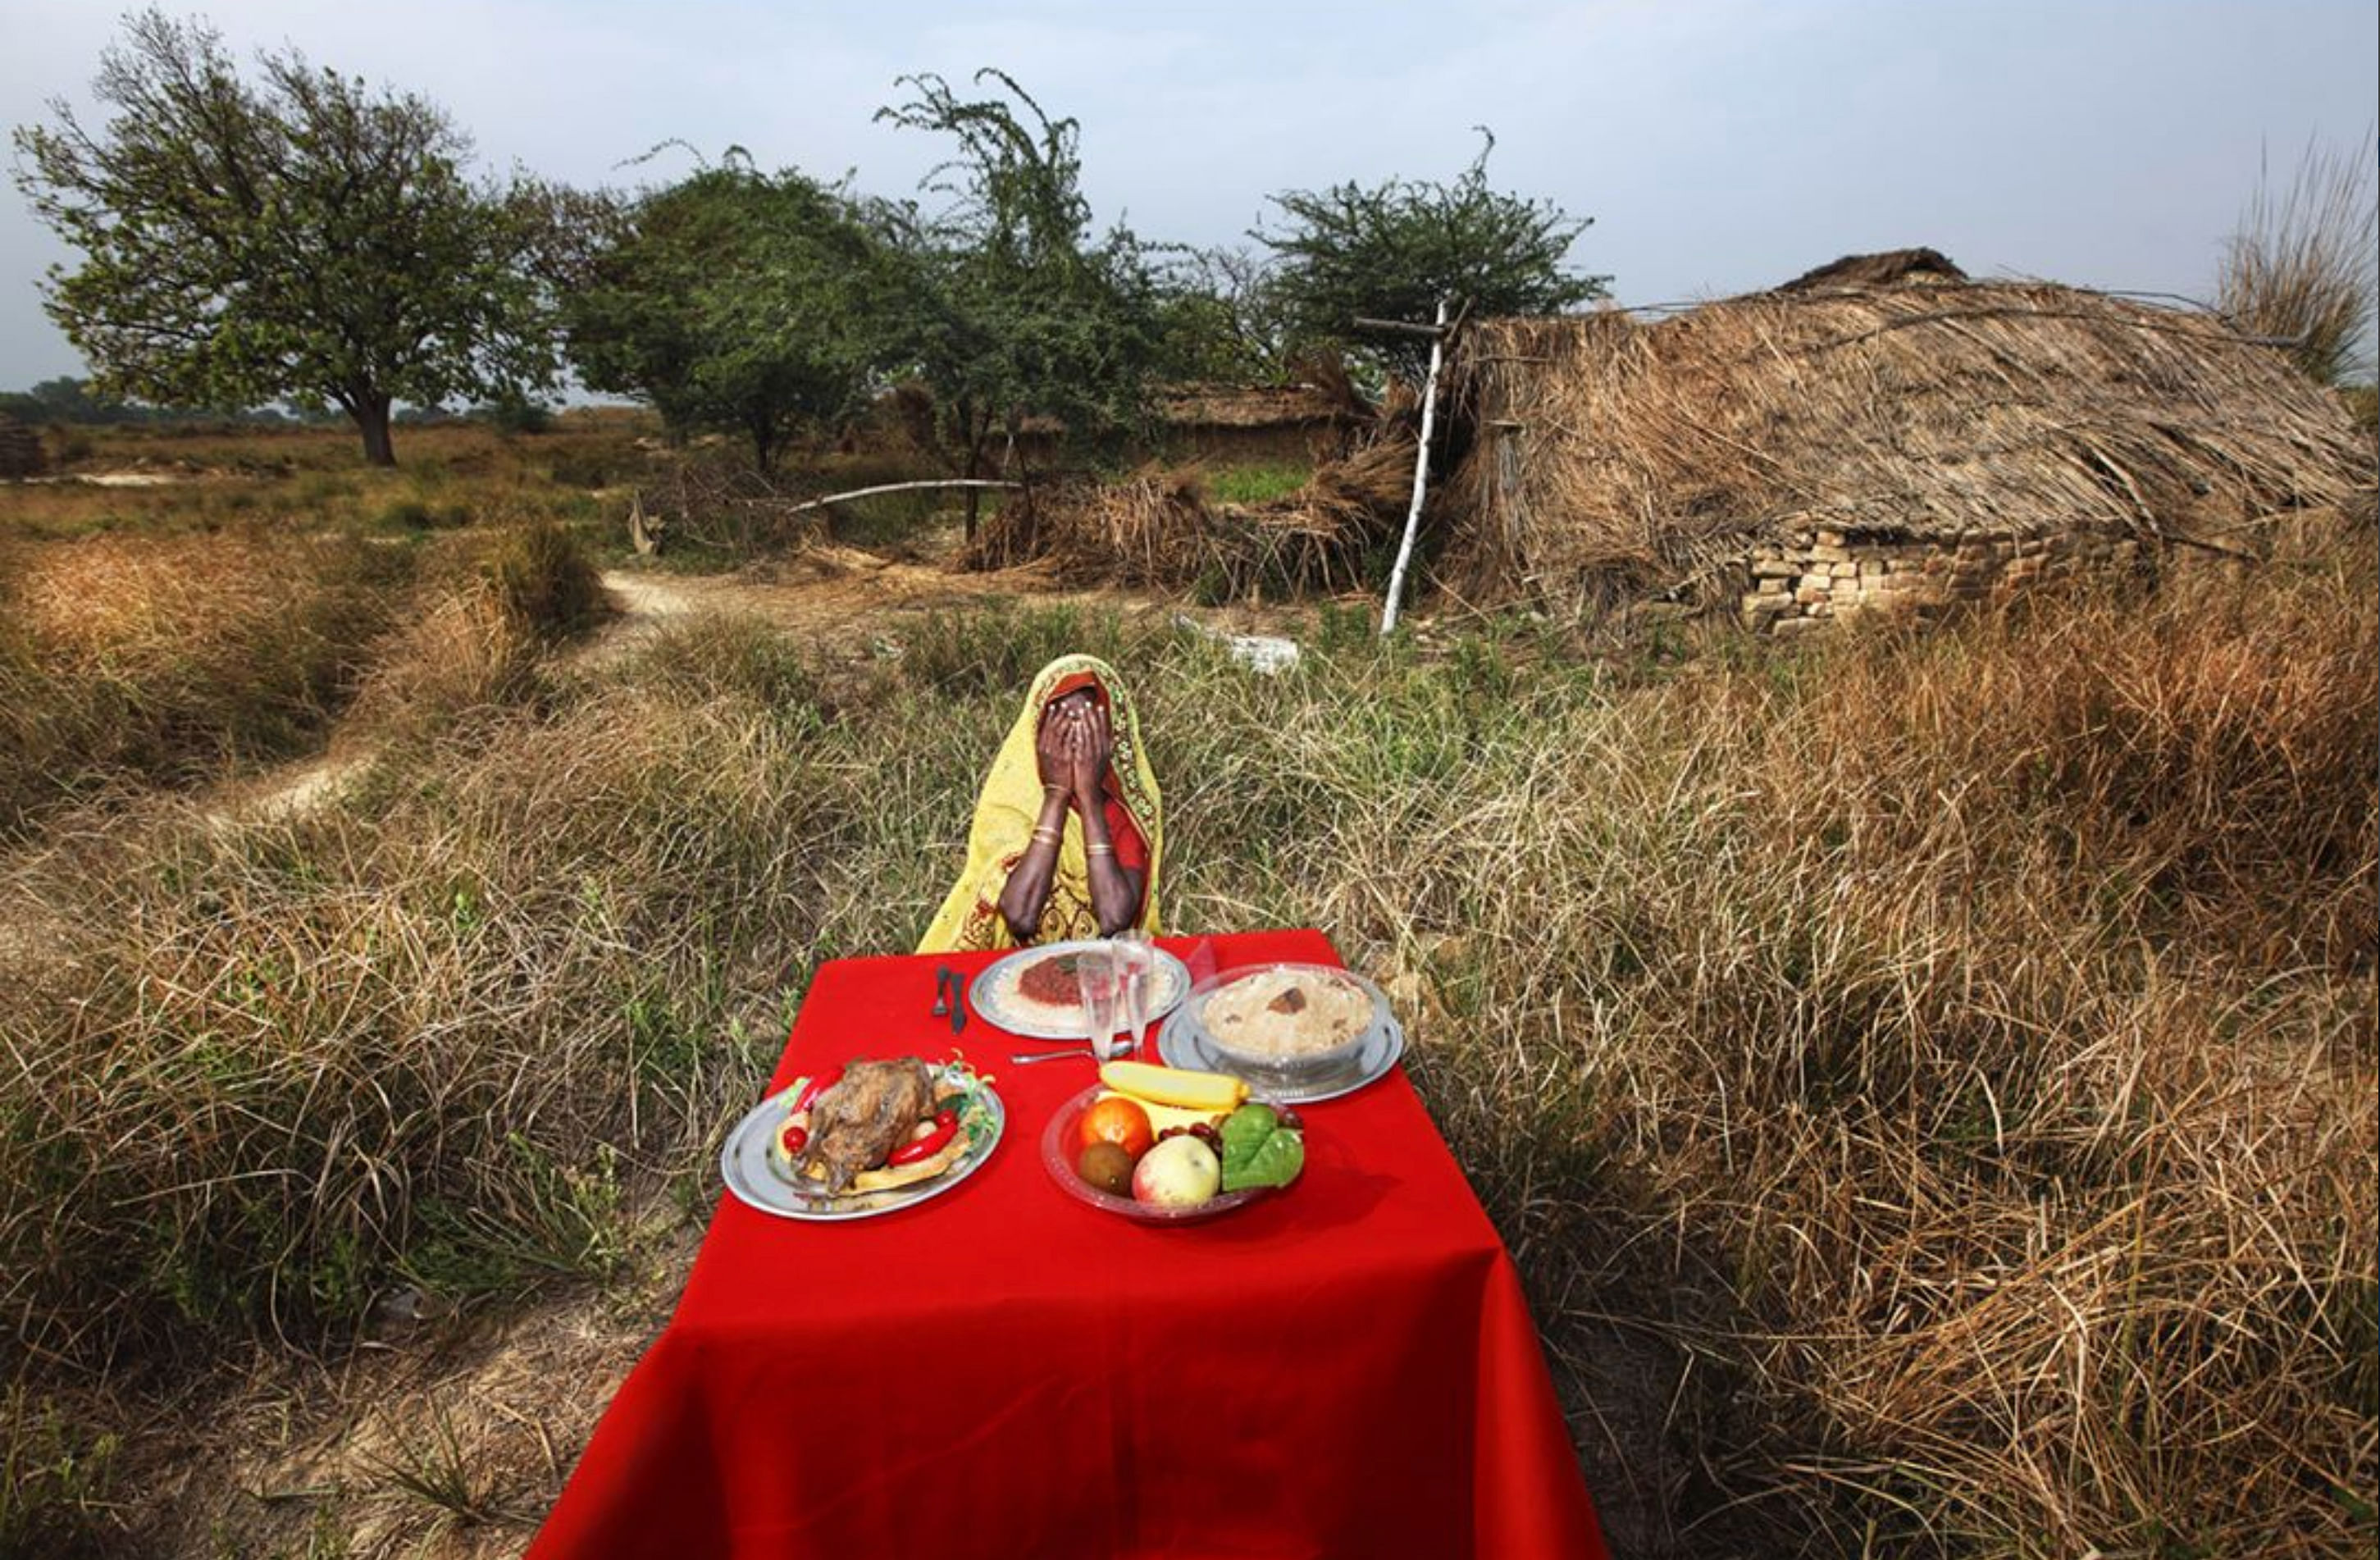 The photographer Alessio Mamo brought with him a table and some fake food. | worldpressphoto/ Instagram